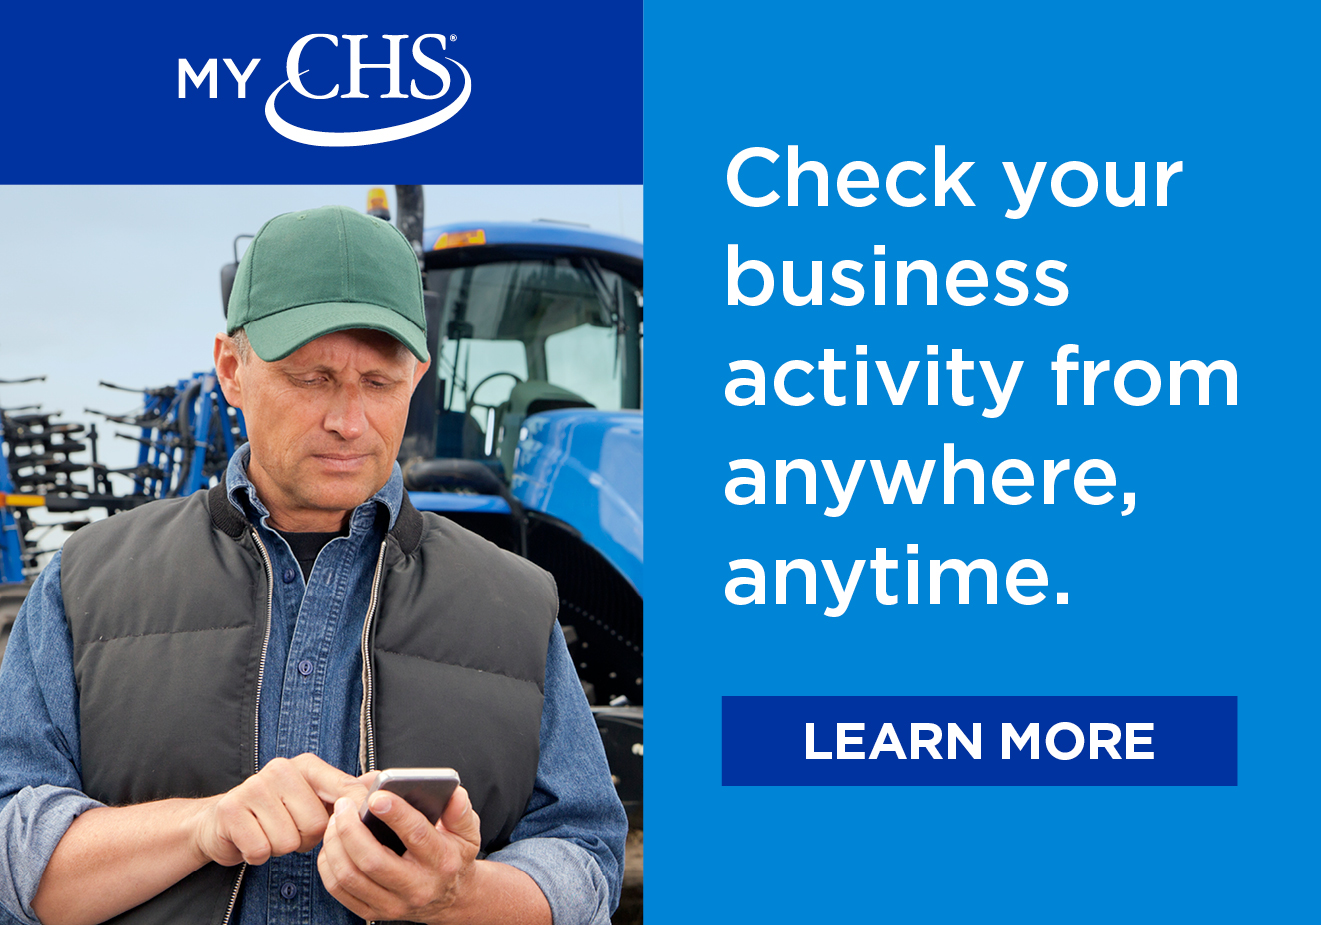 Check your business activity from anywhere, anytime with the MyCHS Customer App